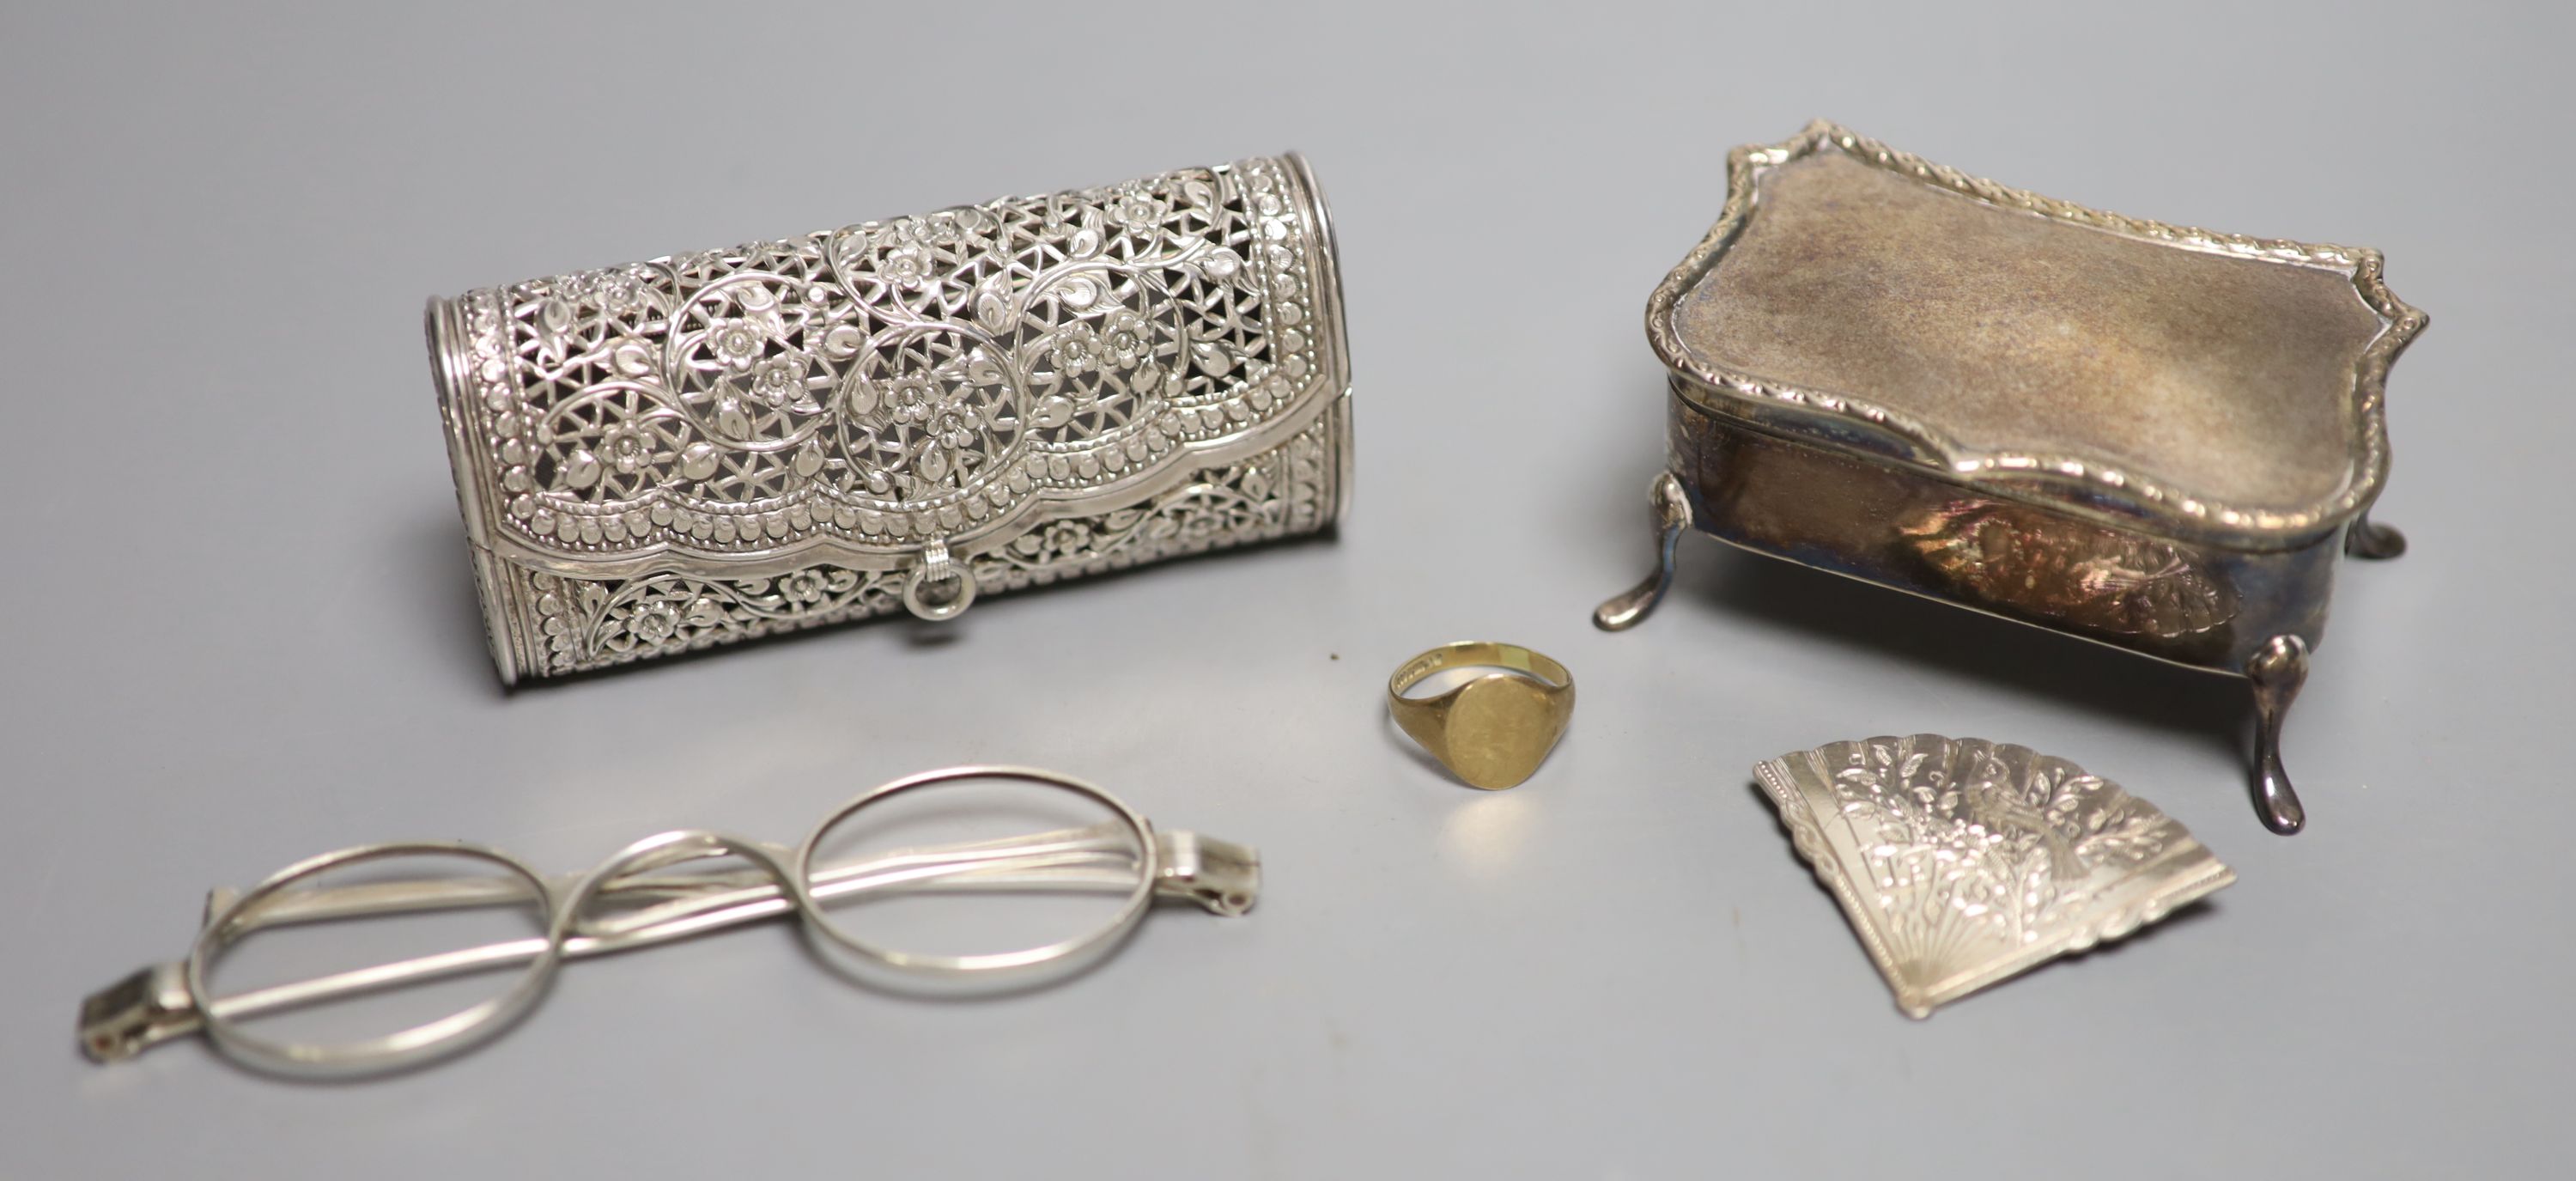 A silver trinket box with velvet-lined interior, an Anglo-Indian white metal coin purse and sundry items,